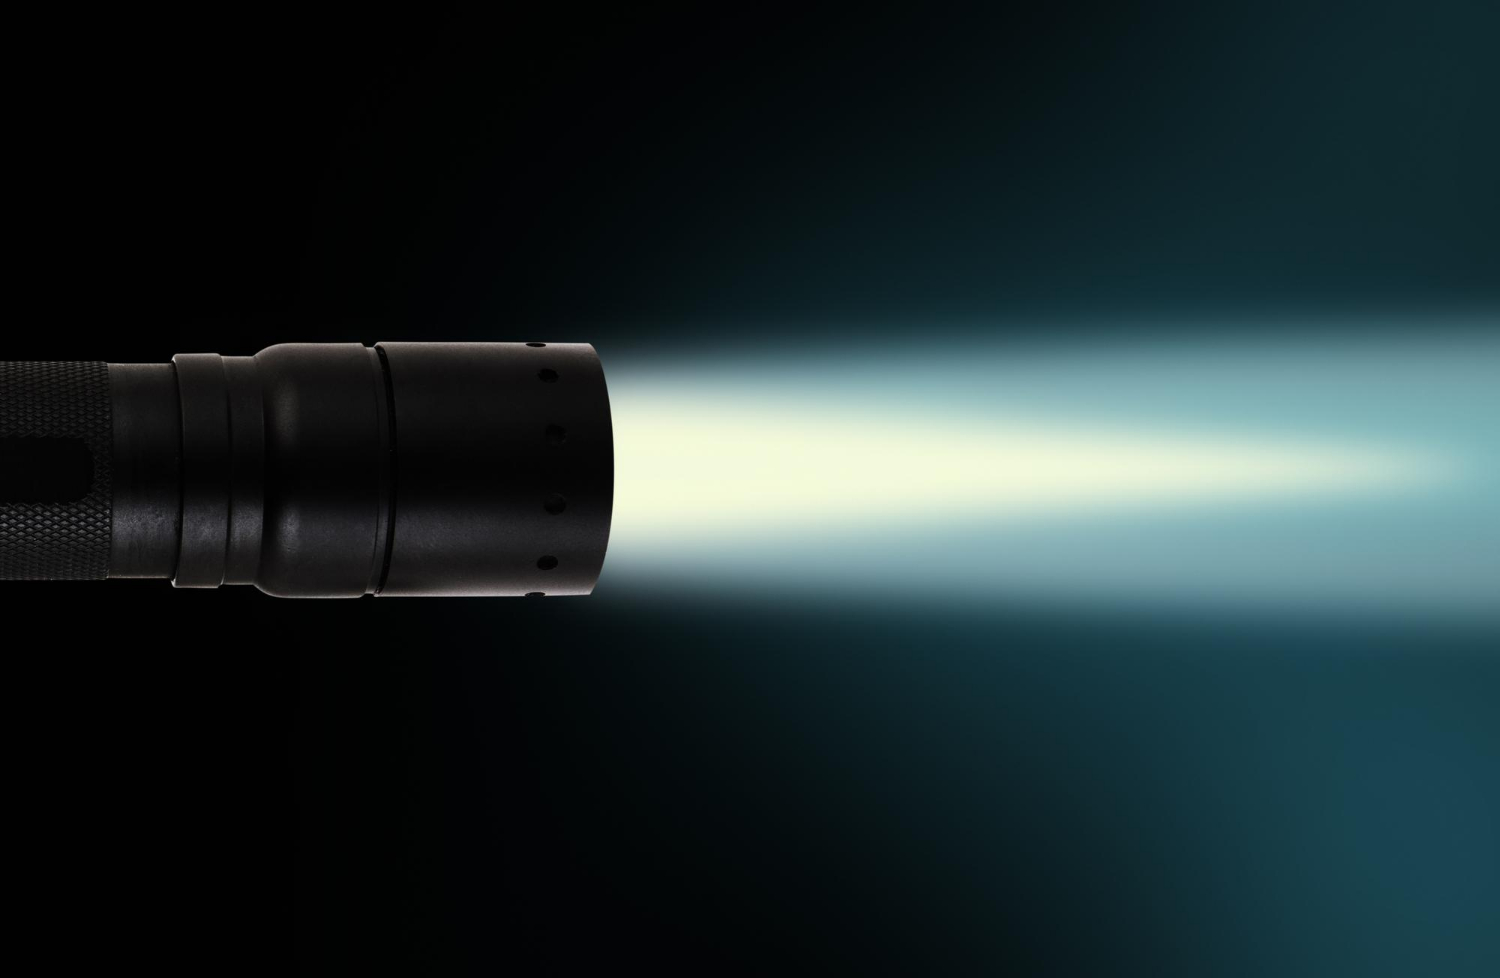 Featured Image of "The Ultimate Guide to Best Stun Gun Flashlights: Your Safety in Focus"